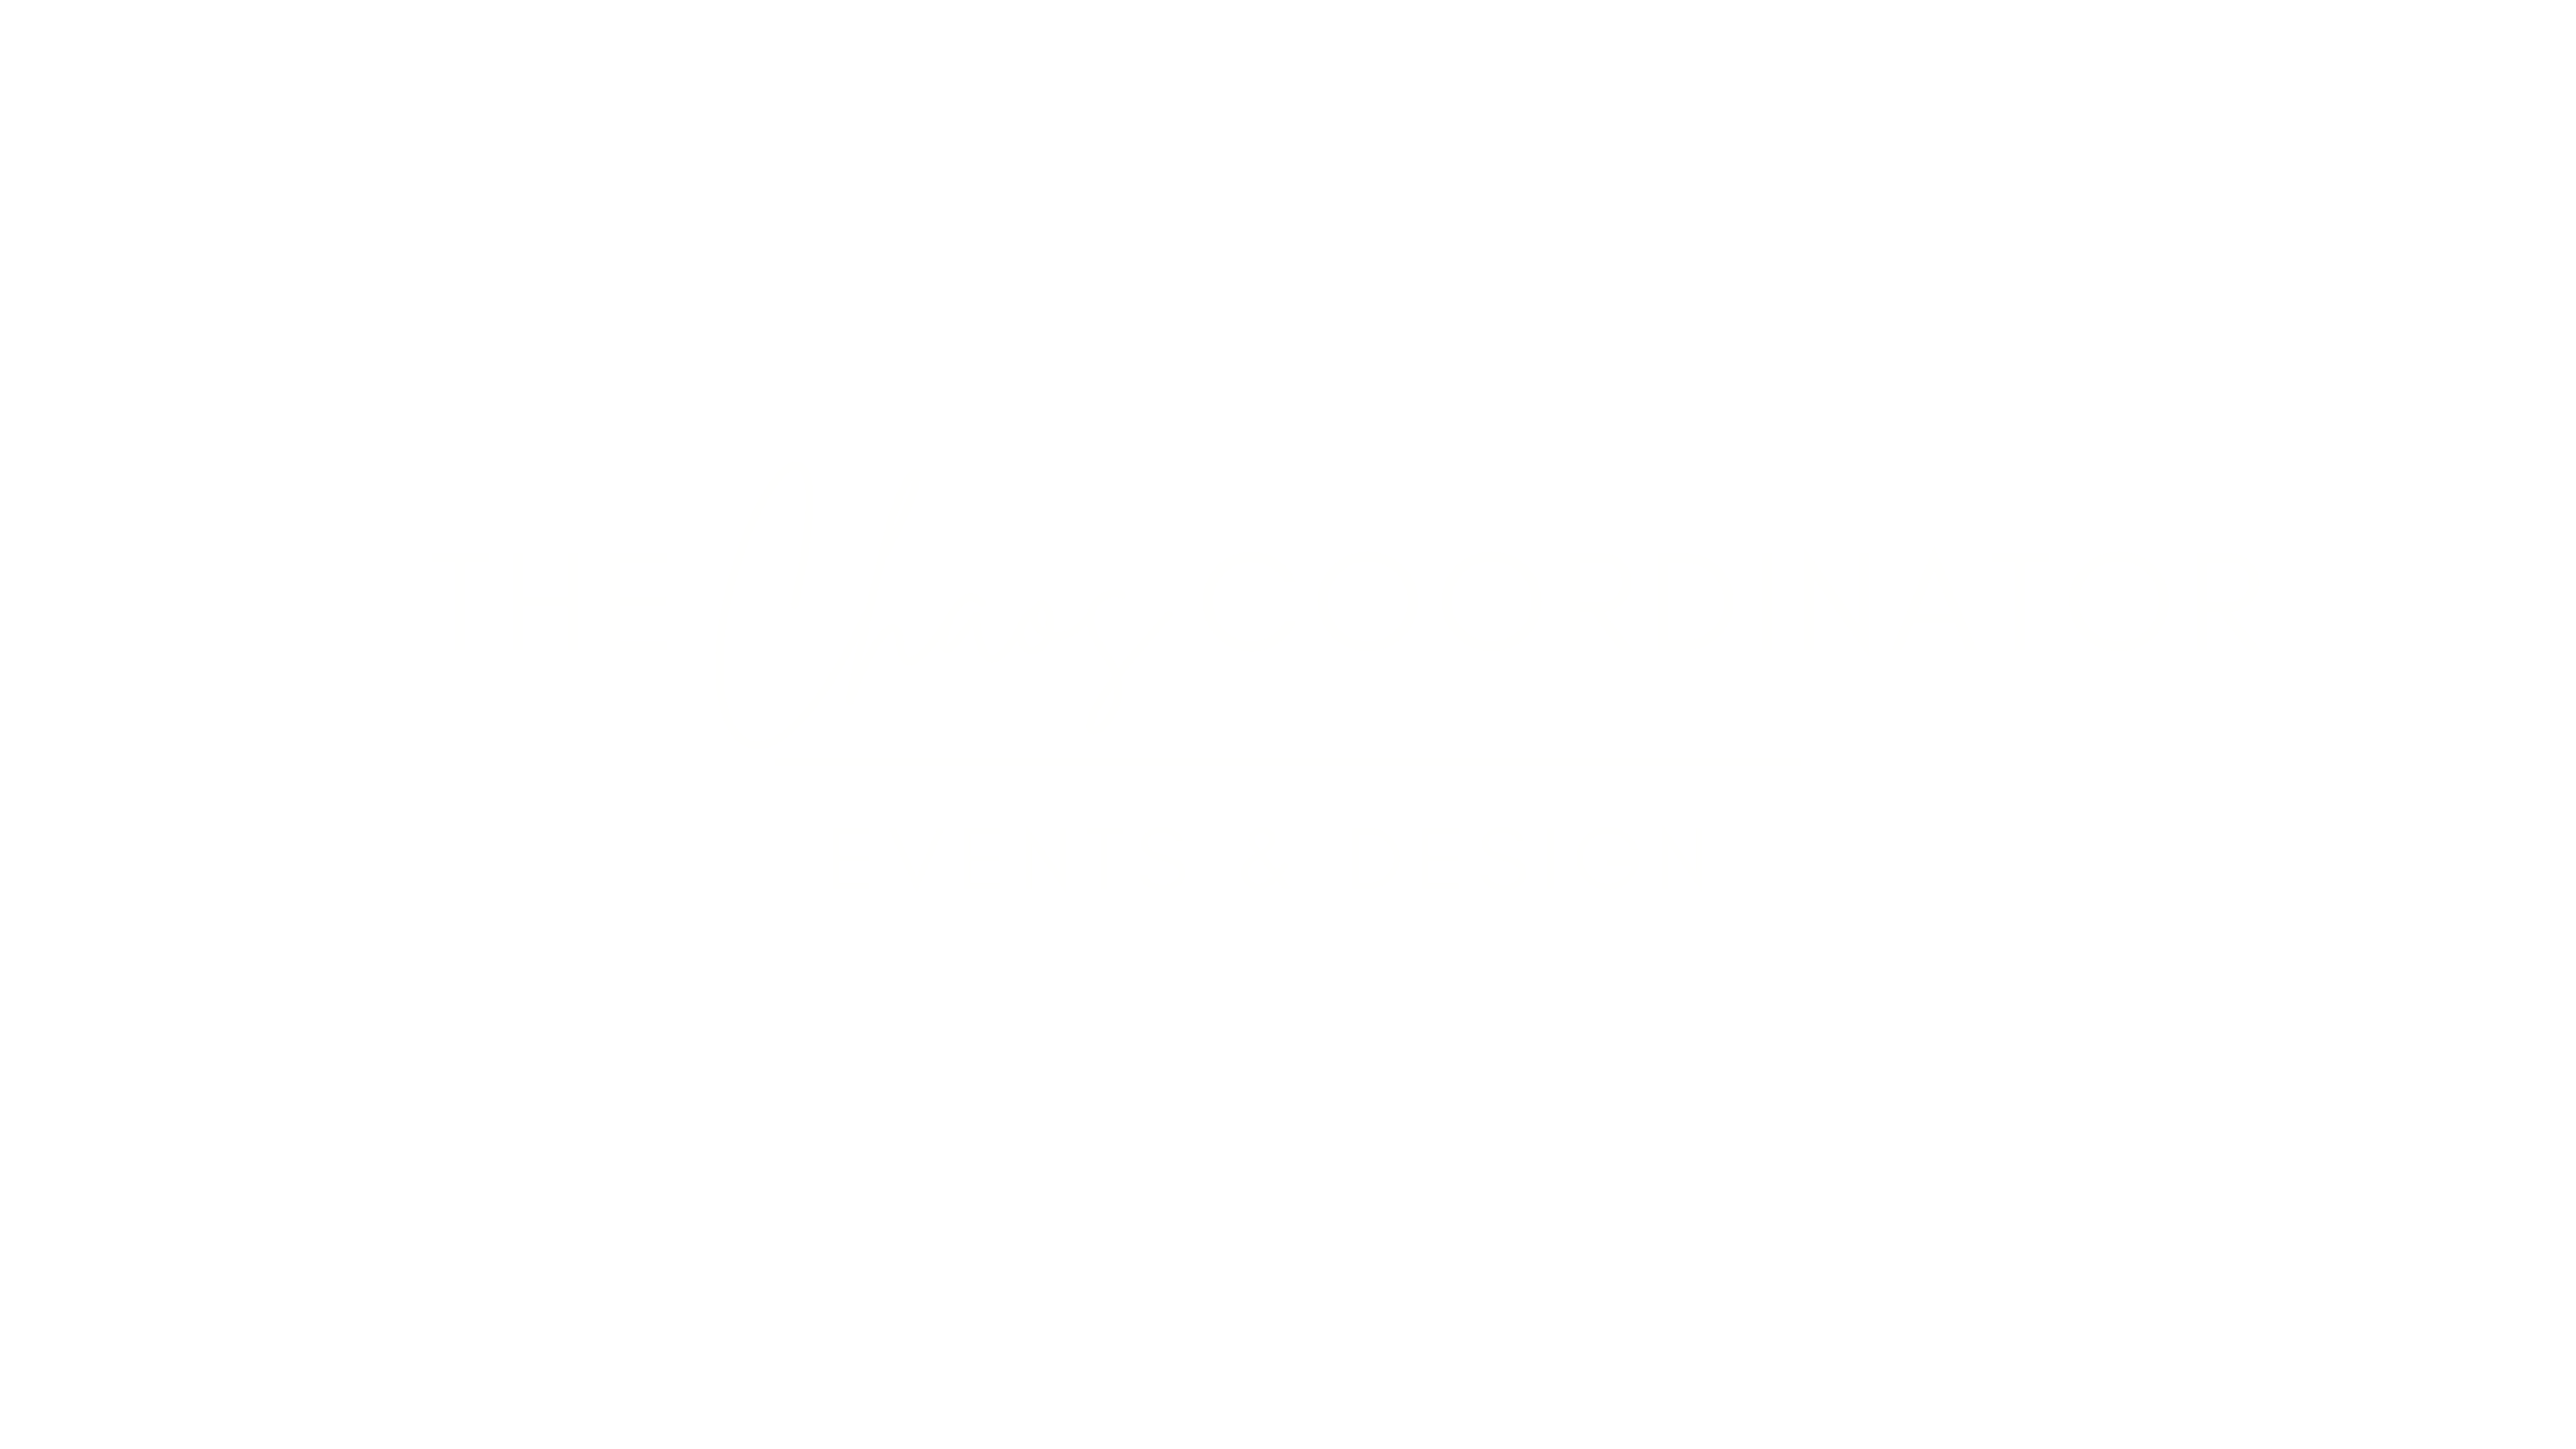 The Chaos Coordinator Events